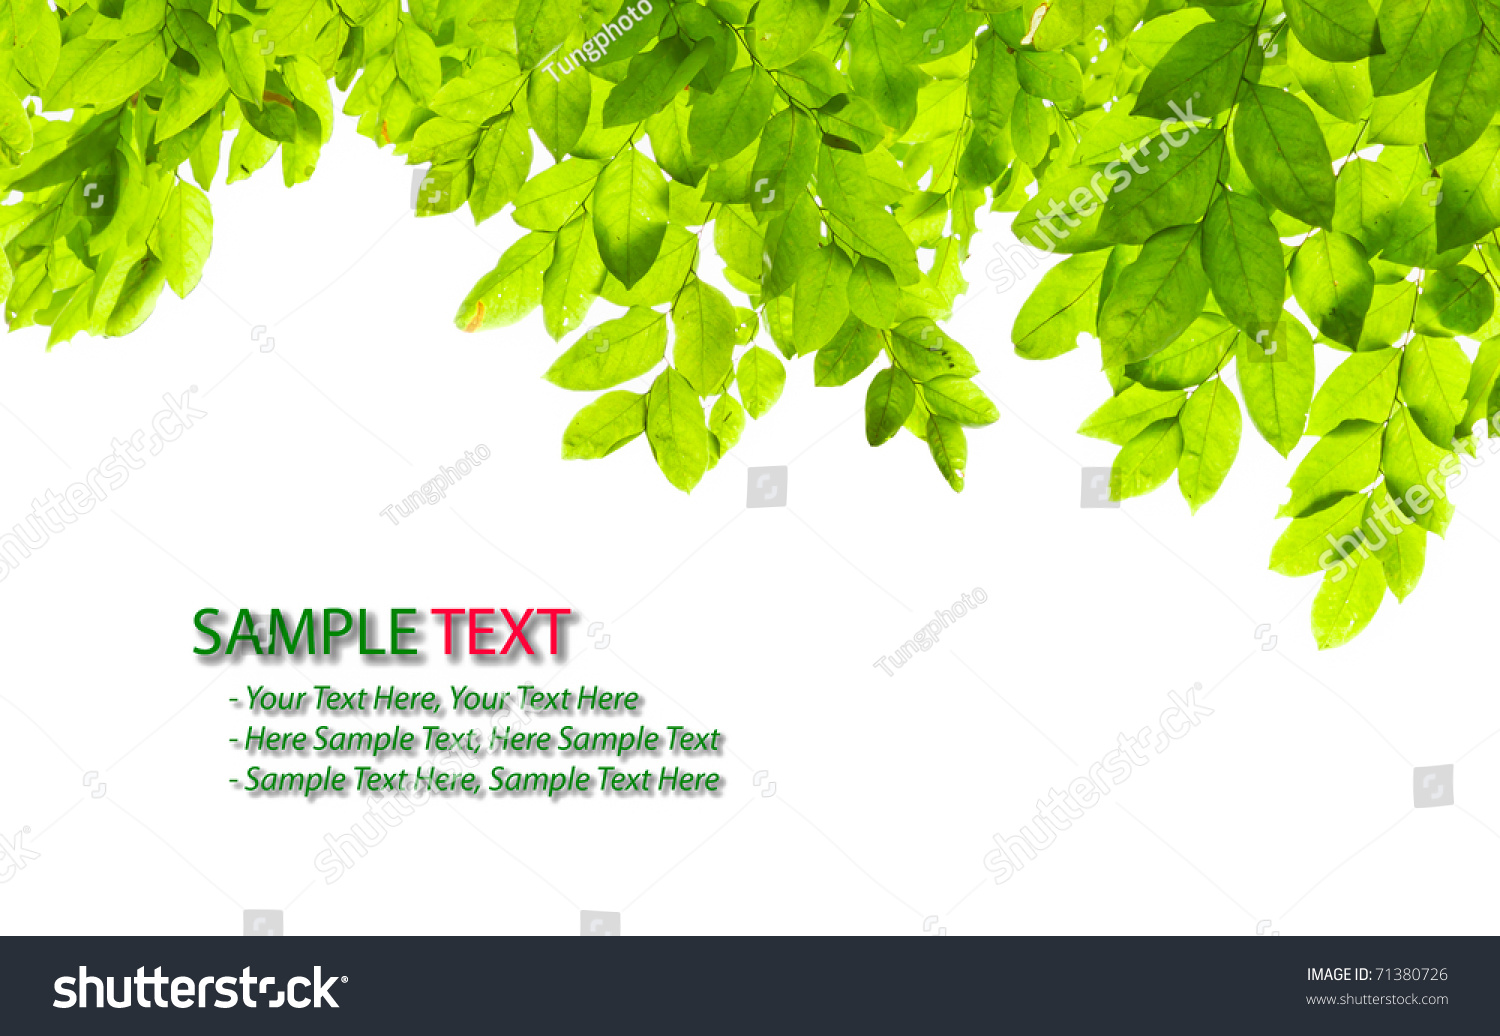 Green Leaf Isolated On White Background Stock Photo (Edit Now) 71380726